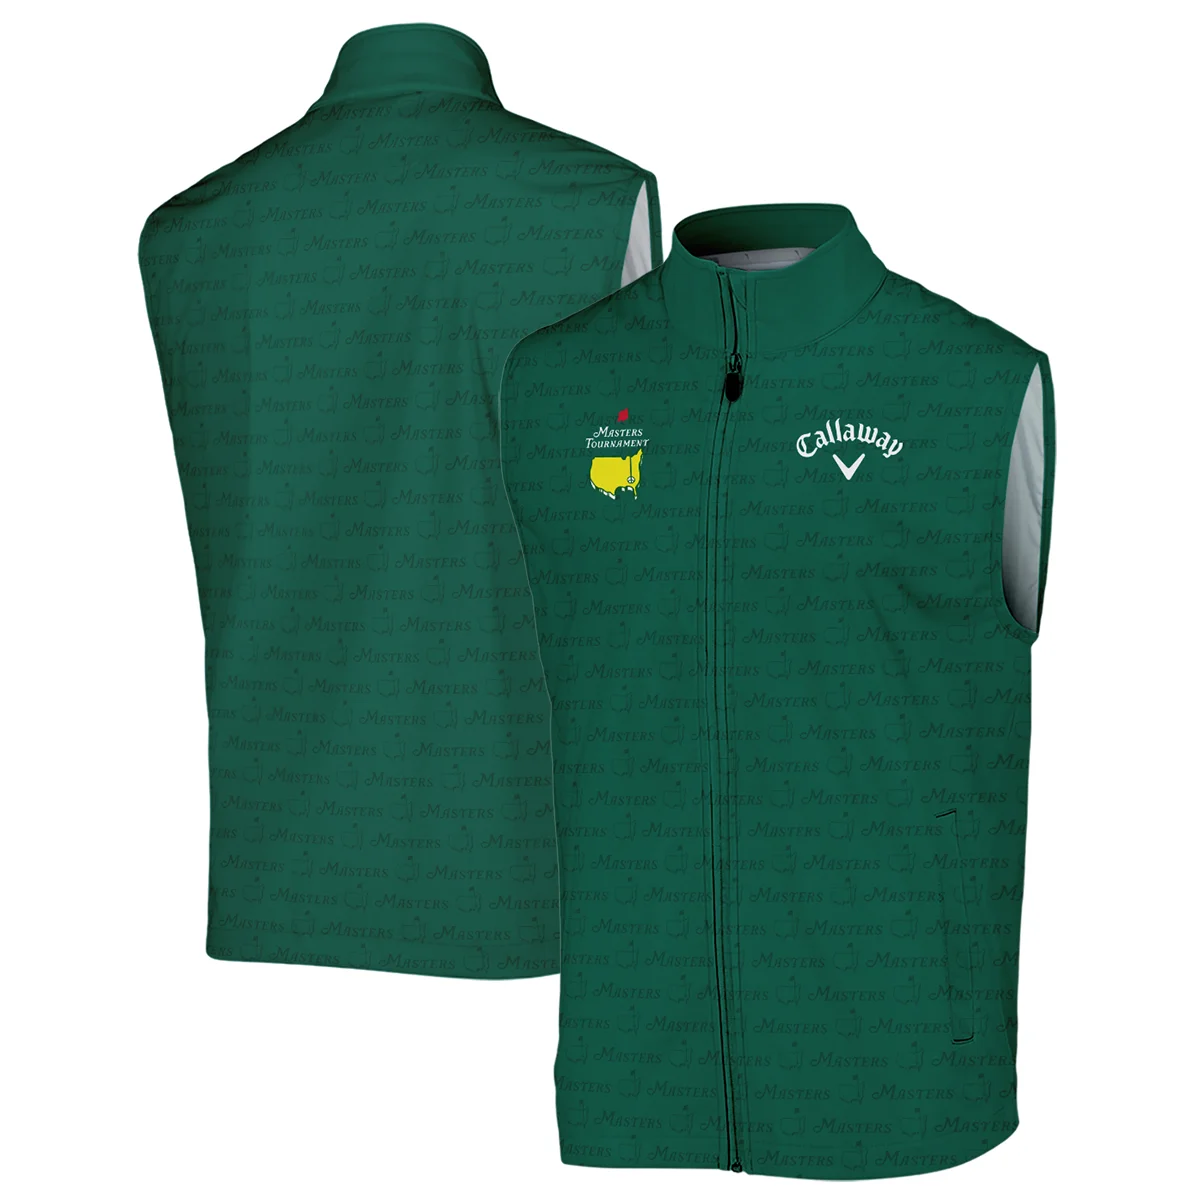 Golf Pattern Cup Green Masters Tournament Callaway Bomber Jacket Style Classic Bomber Jacket